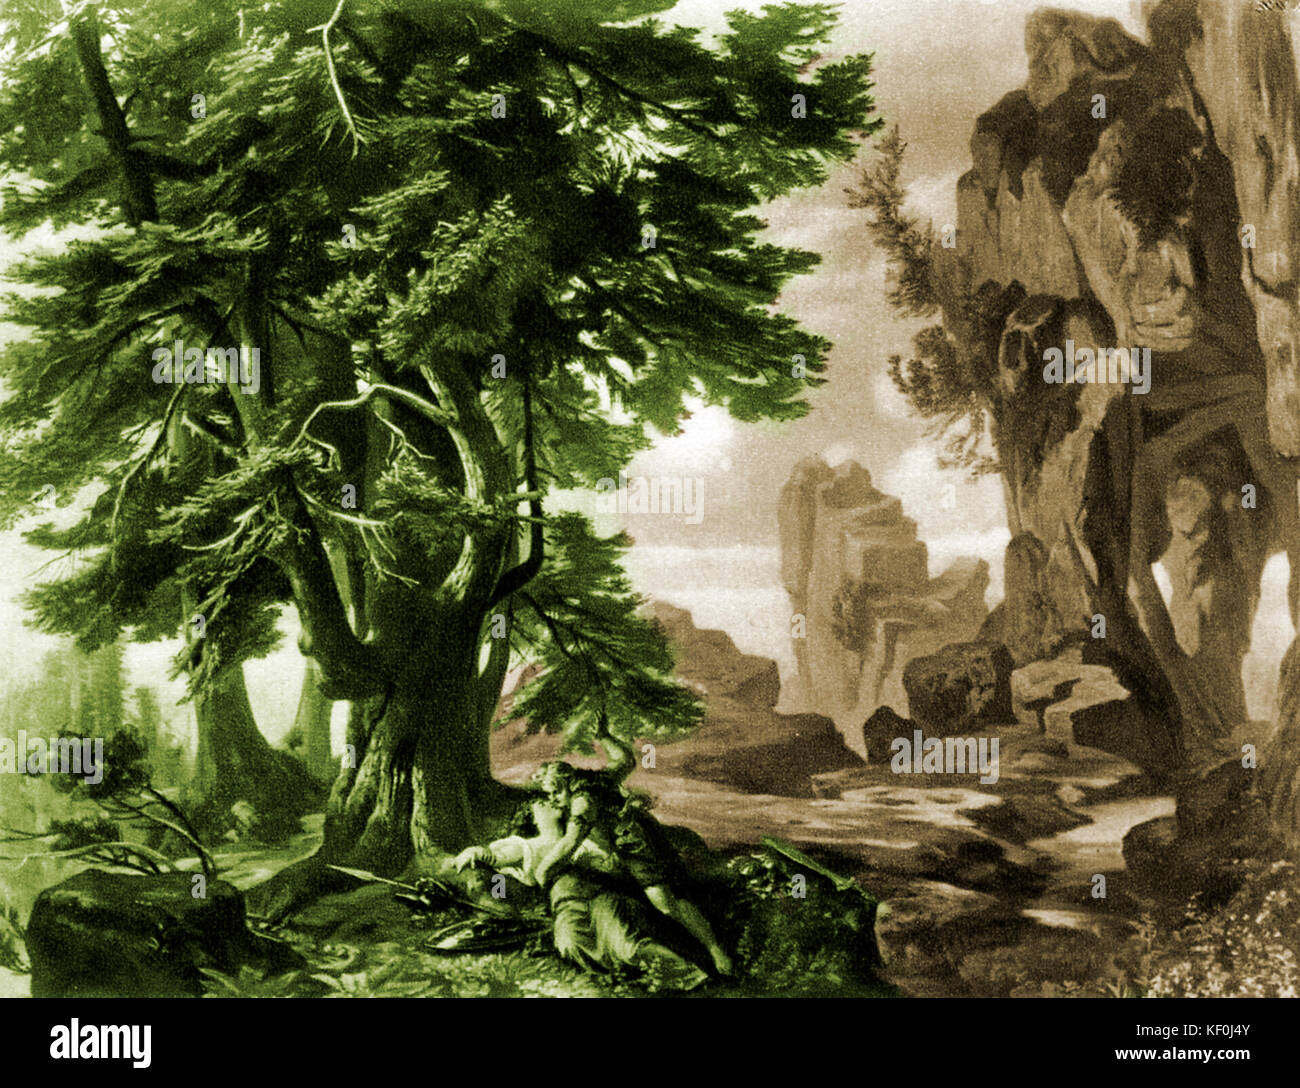 Siegfried by Richard Wagner. Set design by Josef Hoffmann. Caption: Brünnhilde's rock. RW: German composer & author, 22 May 1813 - 13 February 1883. Tinted version. Stock Photo